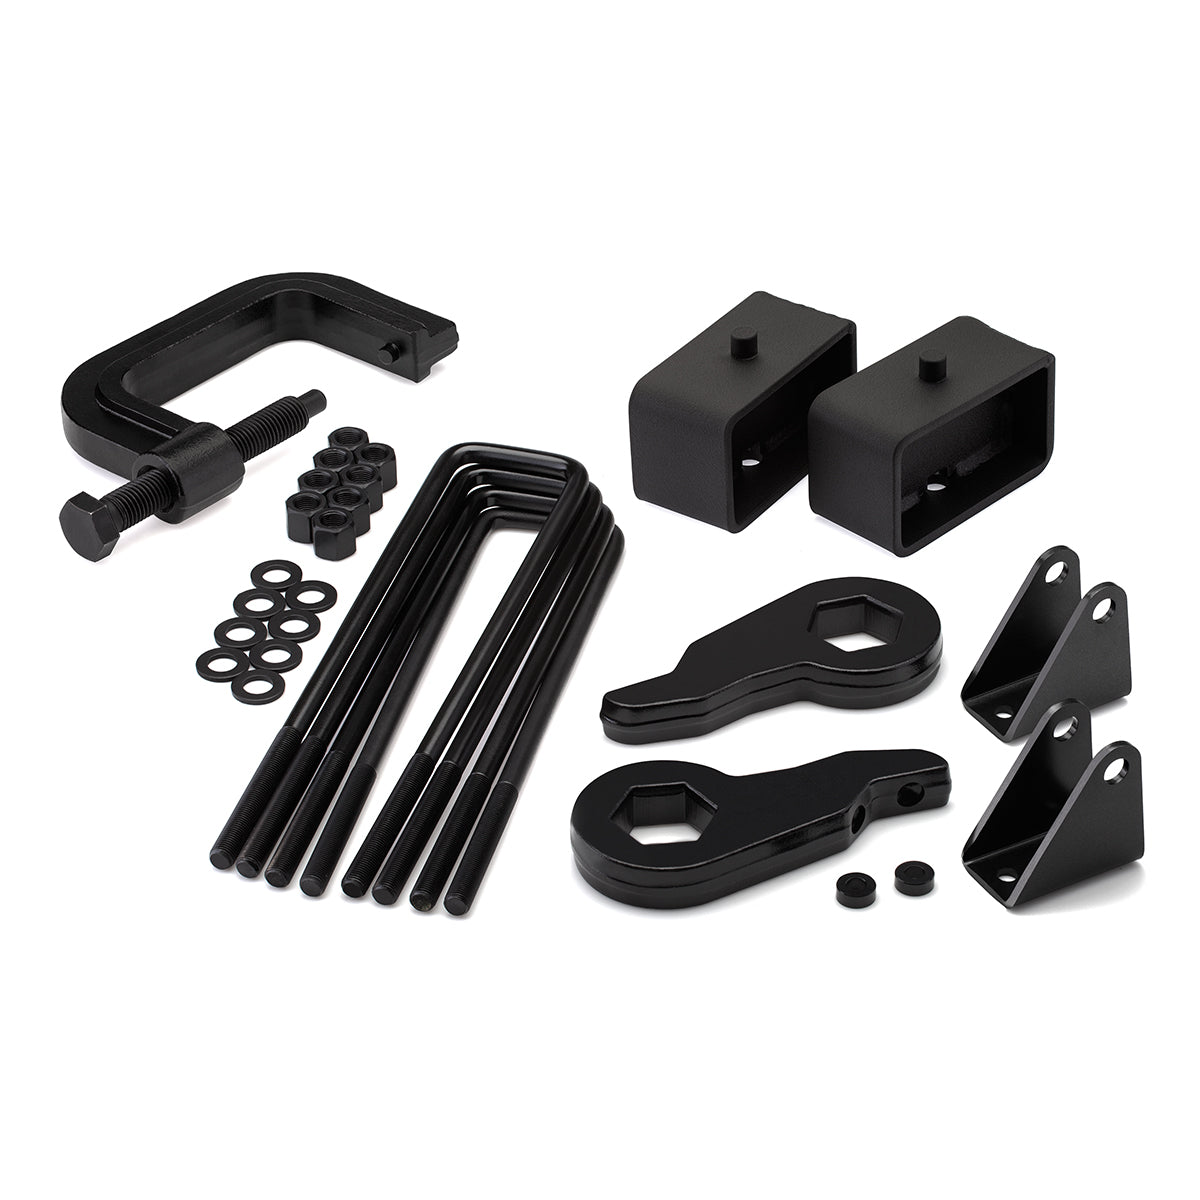 2000-2010 GMC Sierra 3500HD Full Lift Kit with Shock Extender Brackets and Torsion Key Unloading/Removal Tool